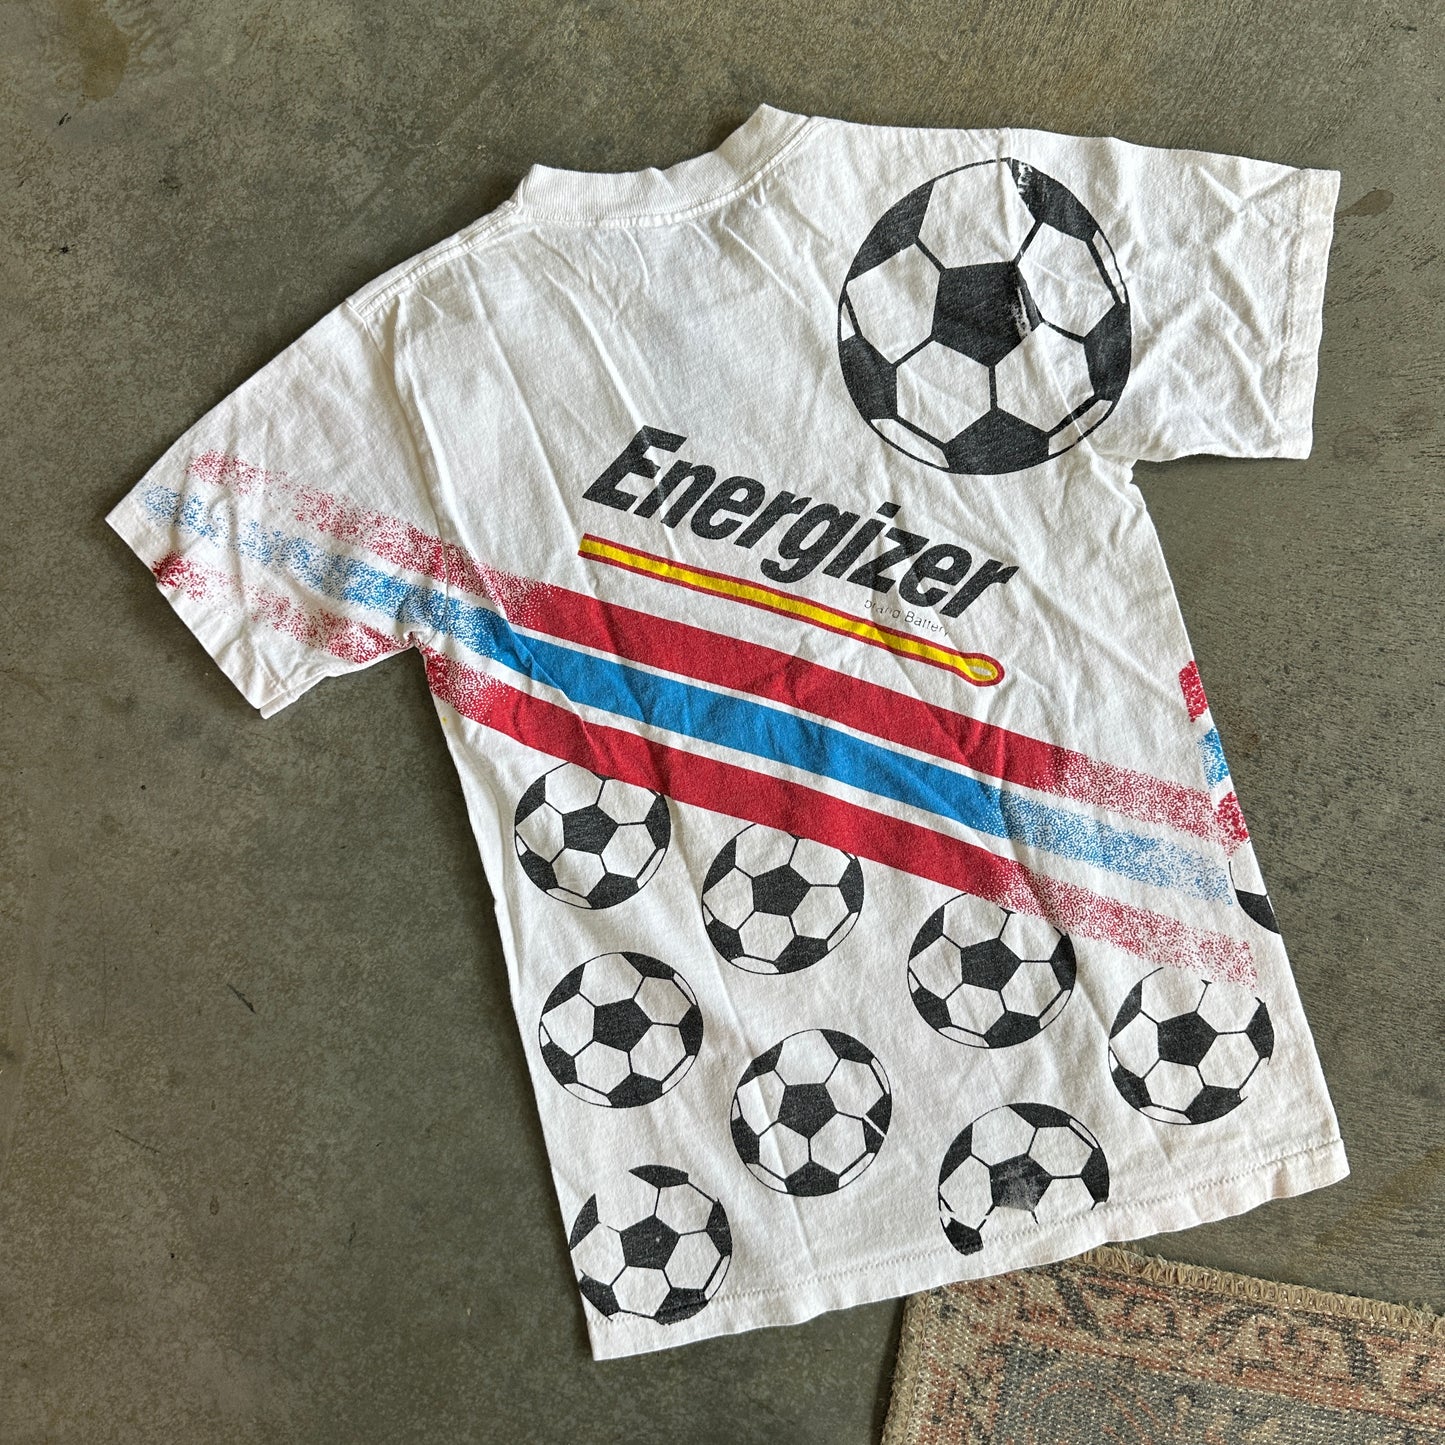 Load image into Gallery viewer, 1994 World Cup AOP Shirt - S
